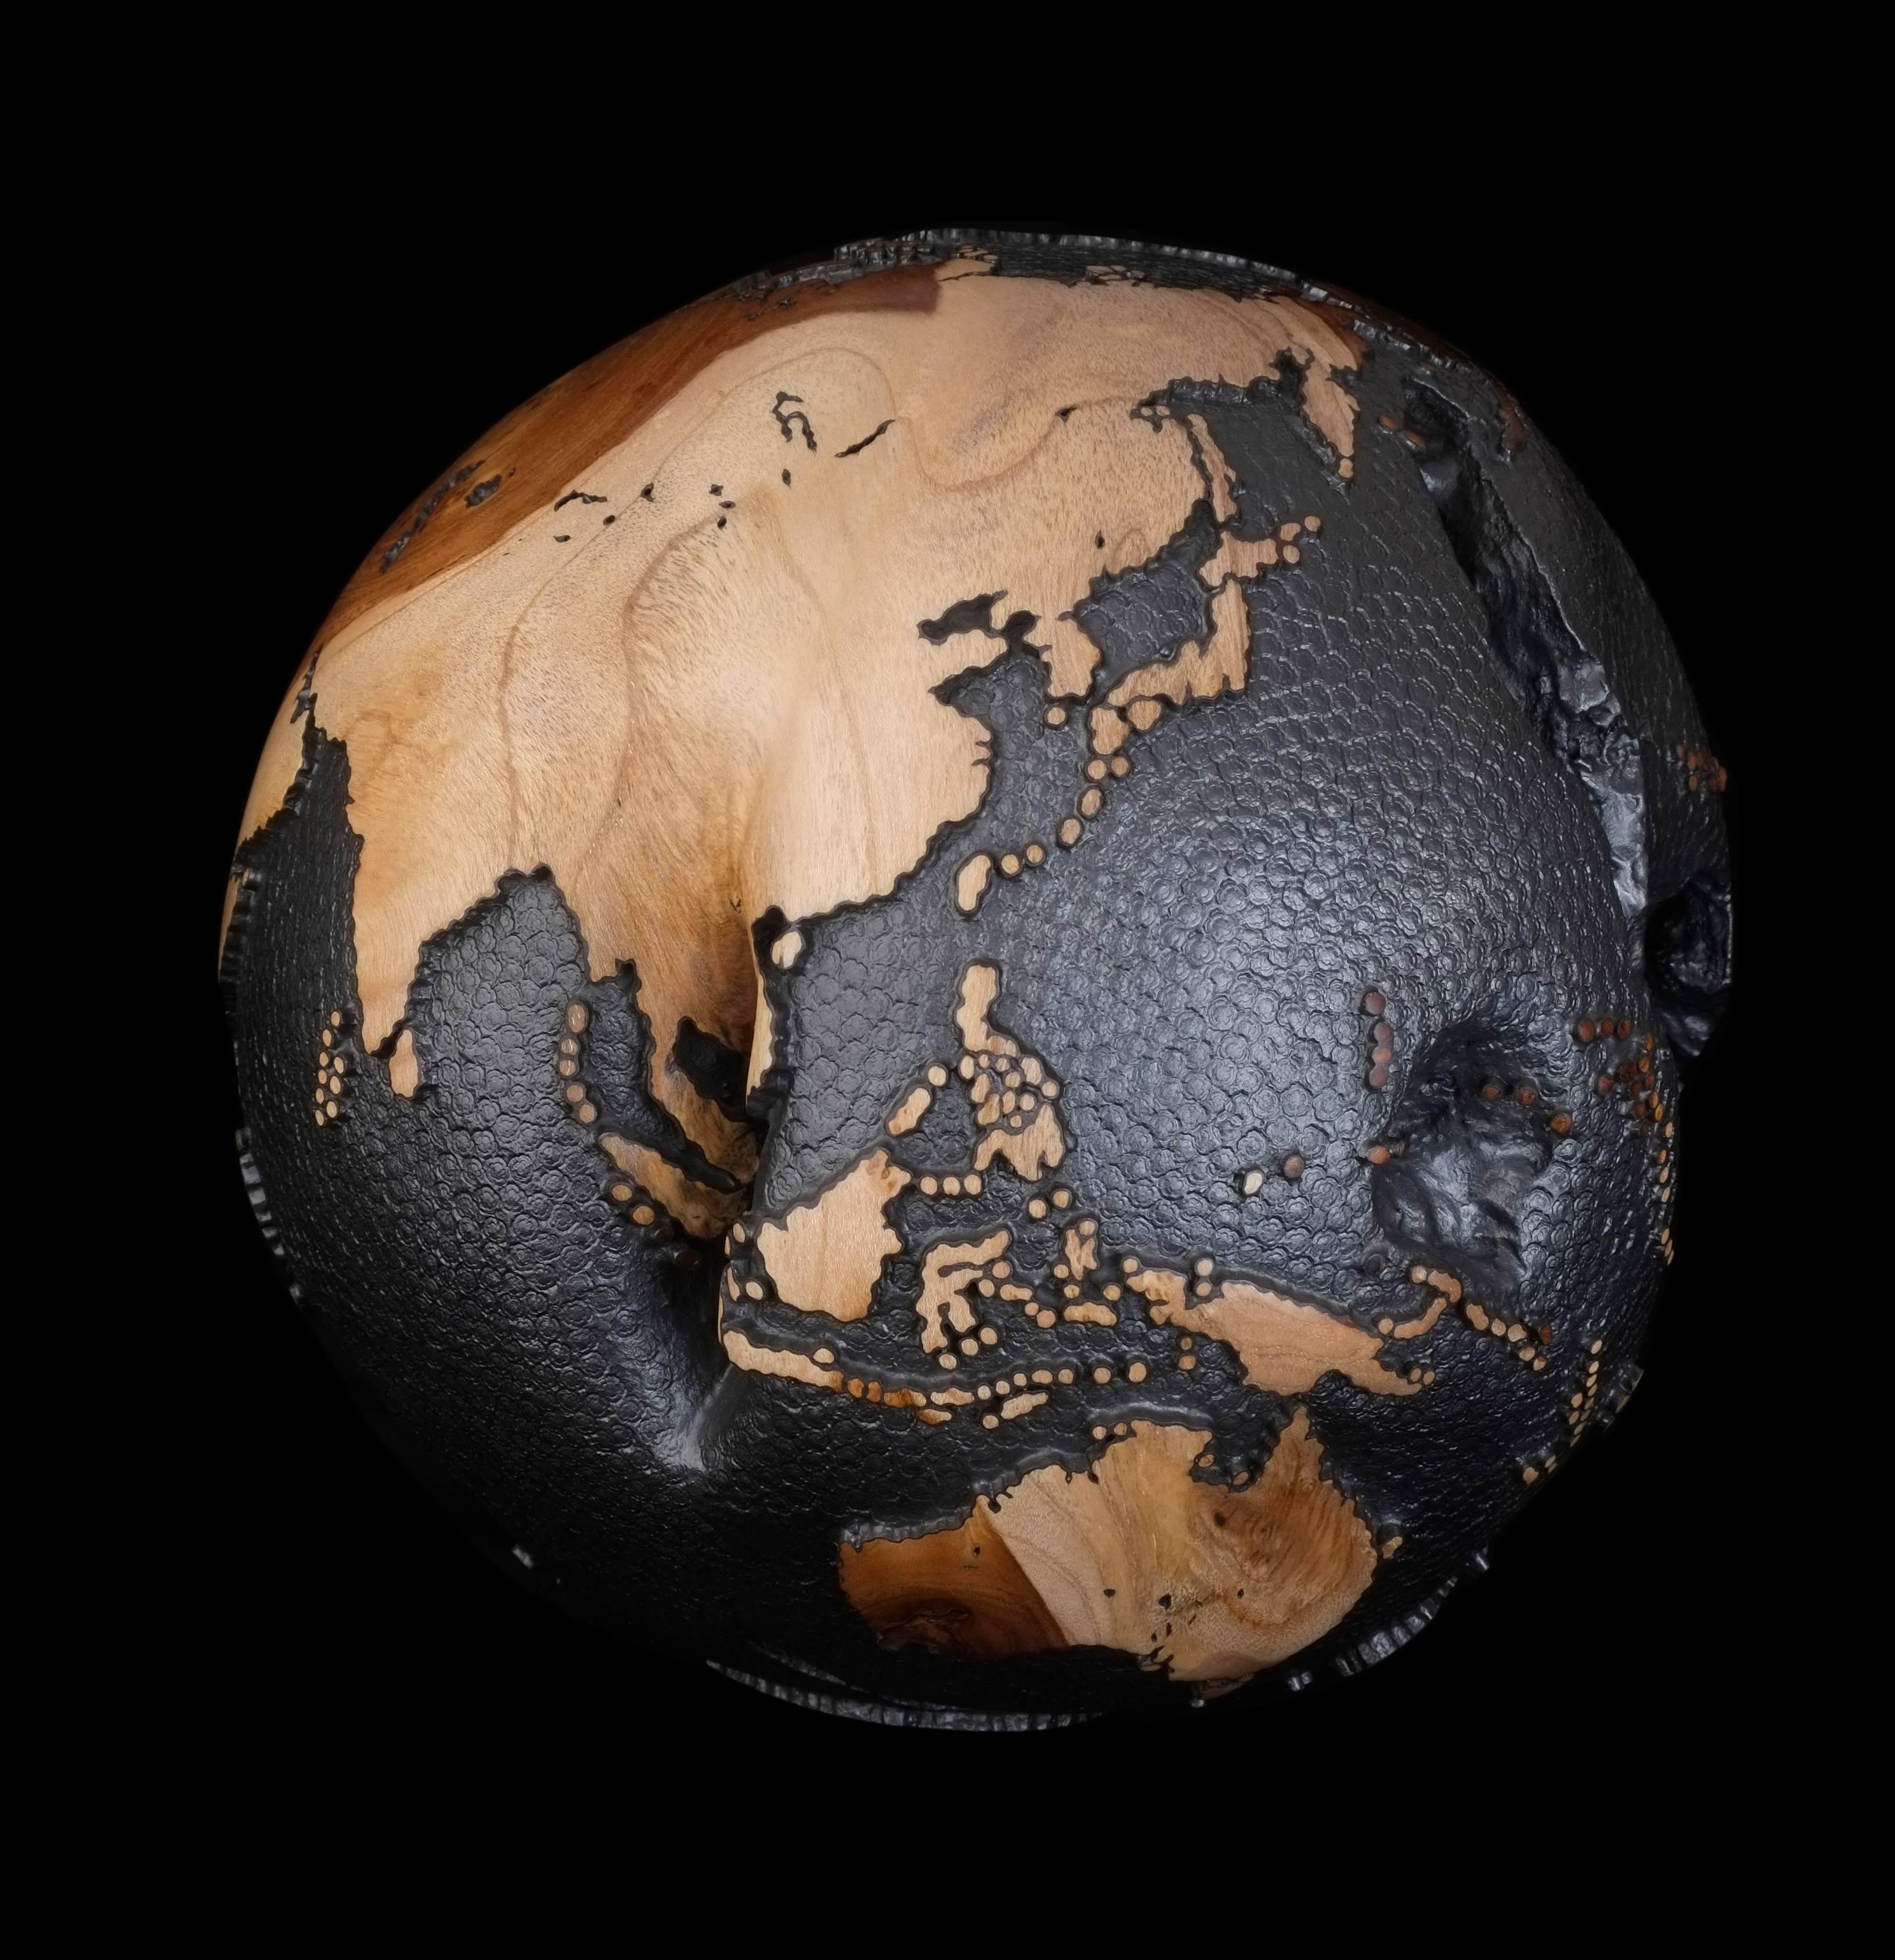 Organic Modern Gold Line Accents Wooden Globe, Steel Hammered and Graphite 30cm, Saturday Sale For Sale